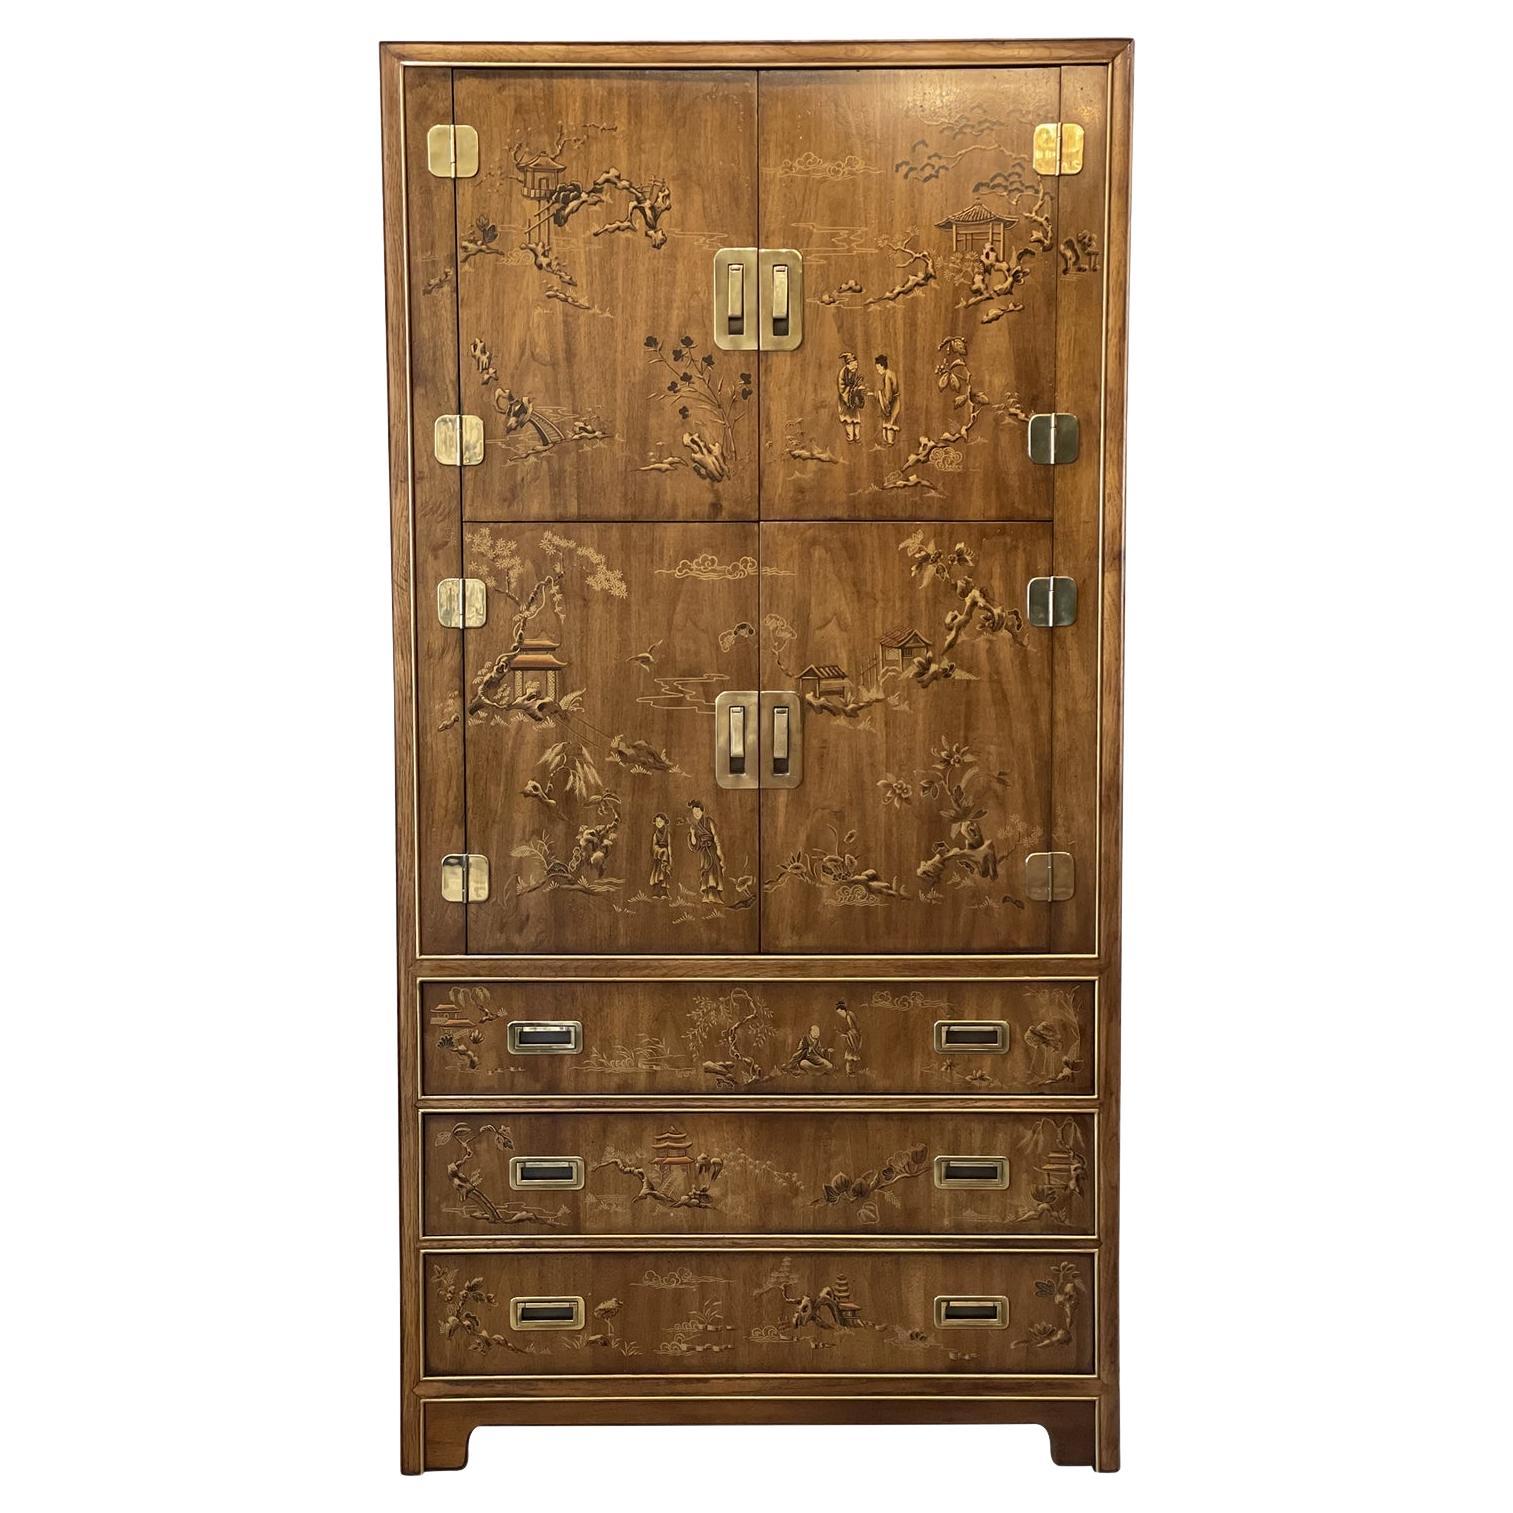 1970s Drexel Heritage Chinoiserie Armoire Dresser